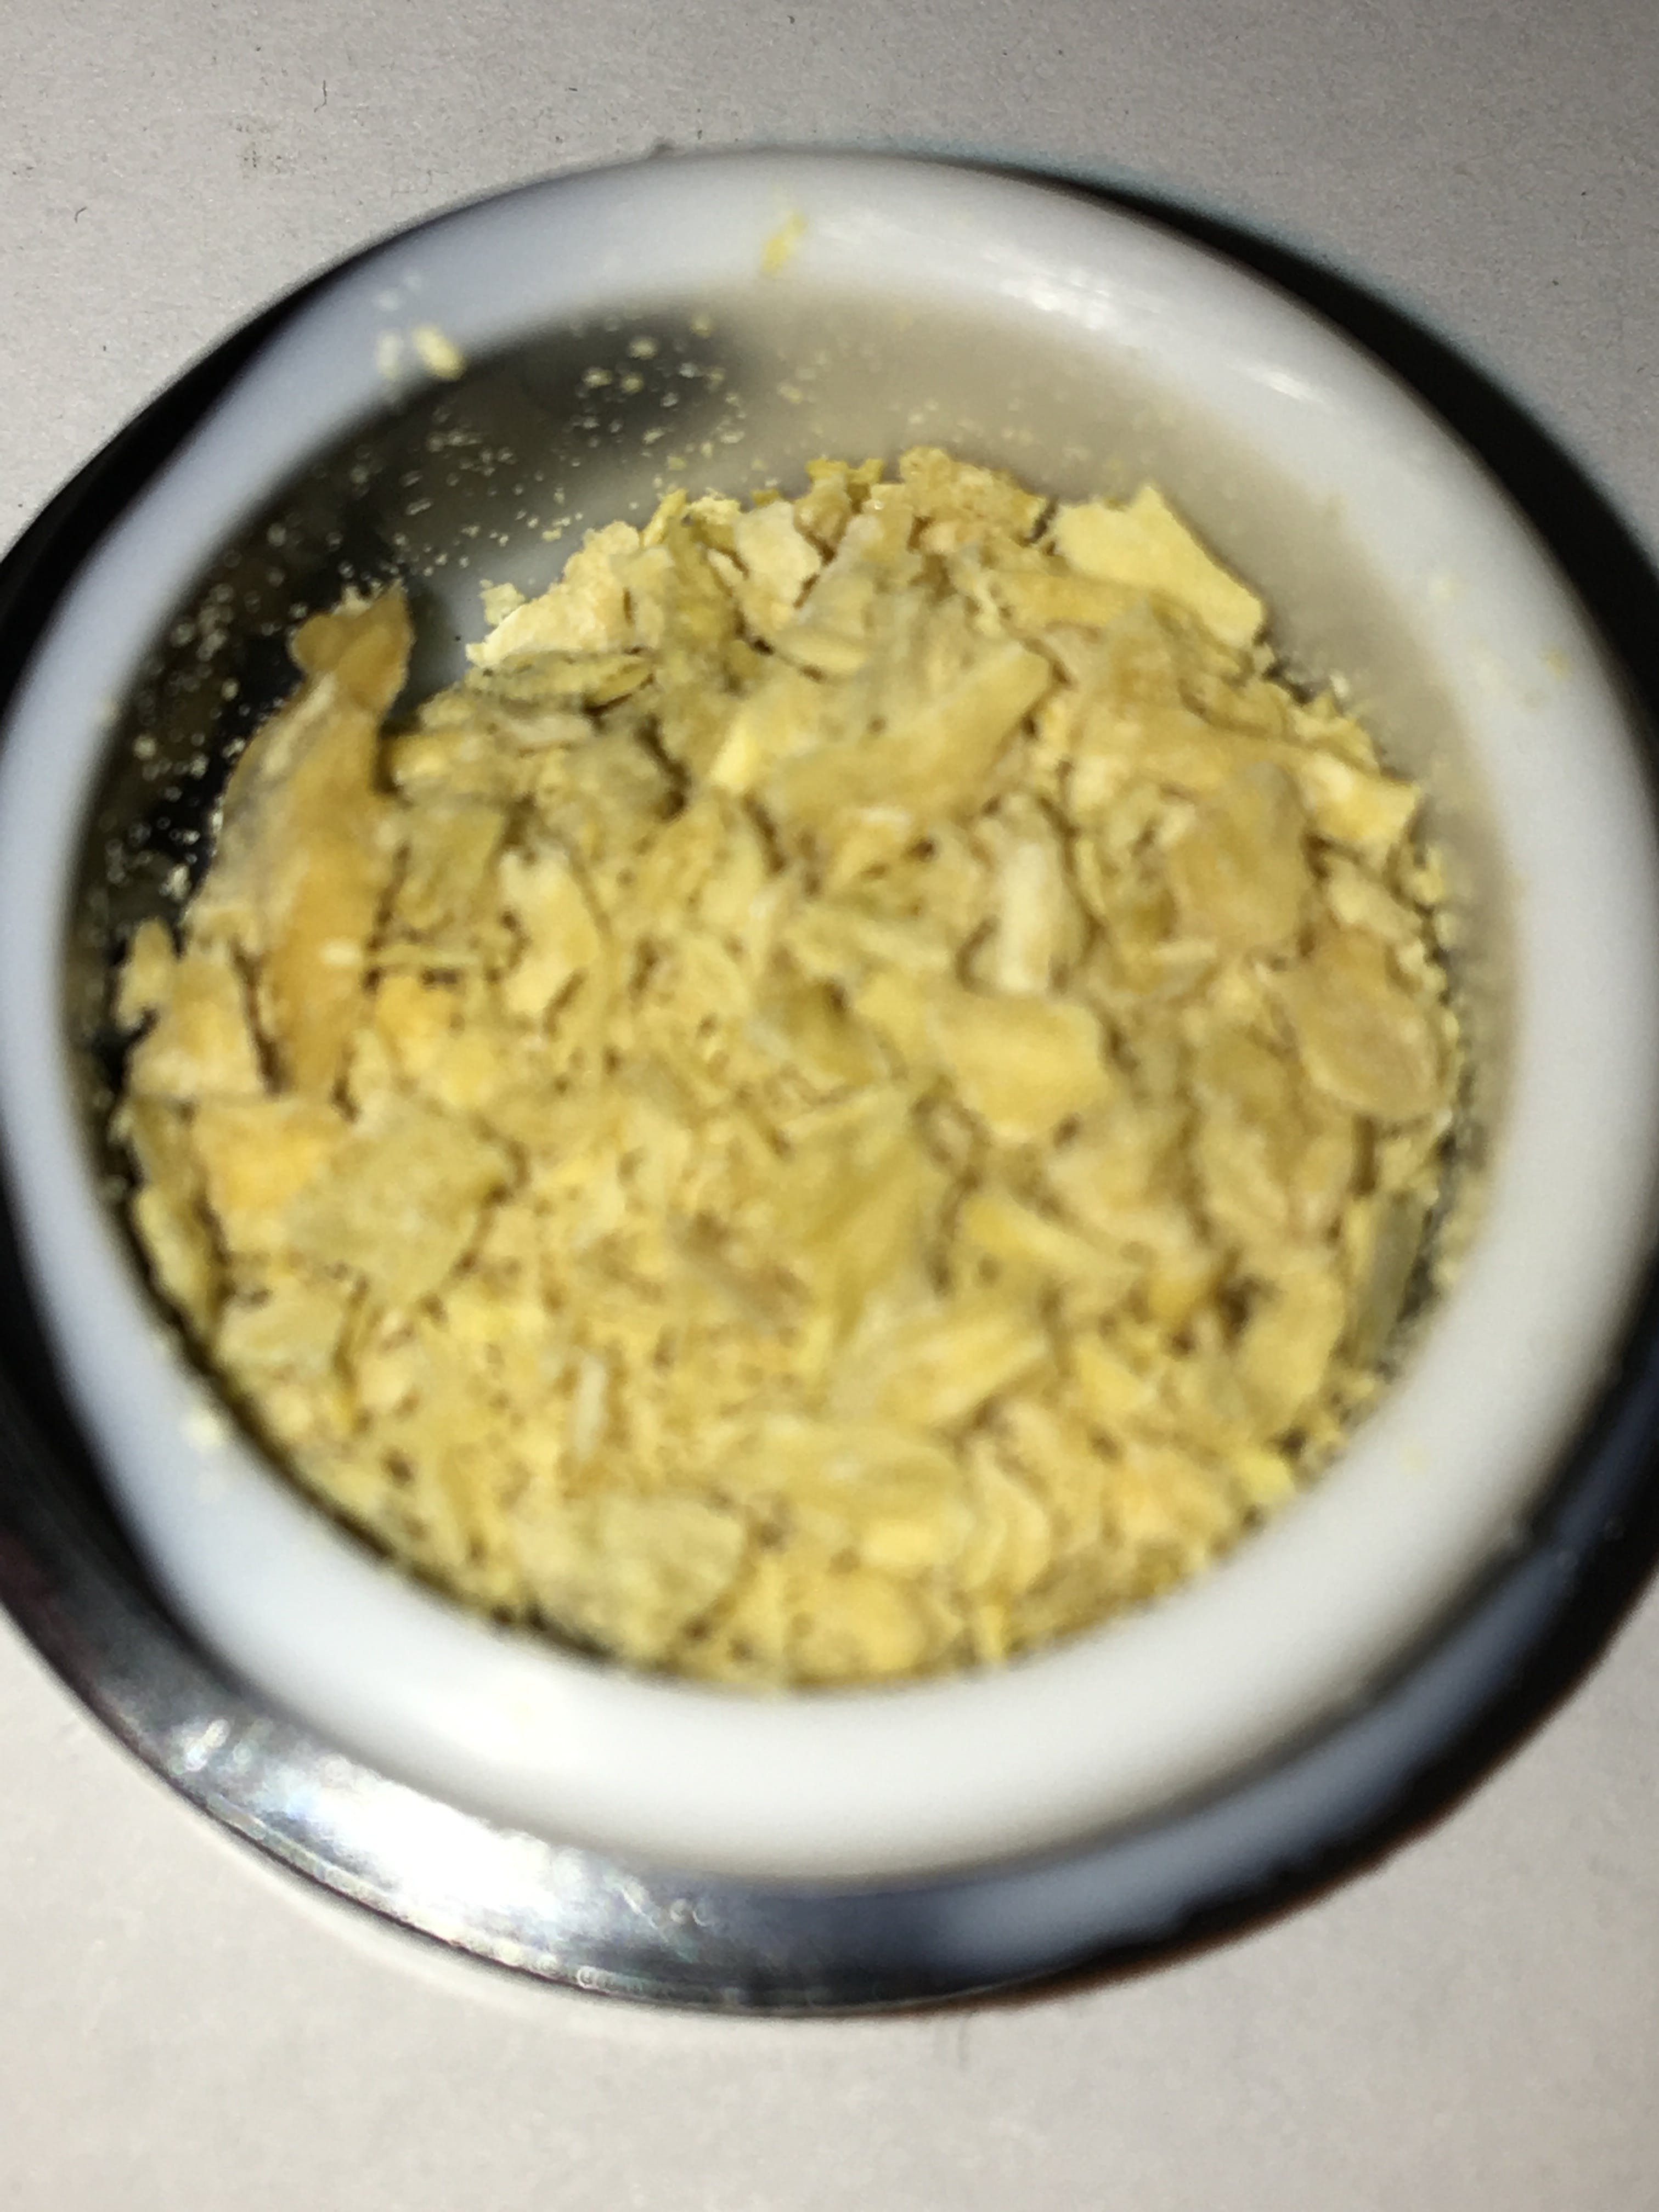 concentrate-og-master-crumble-21-21-1g-for-25